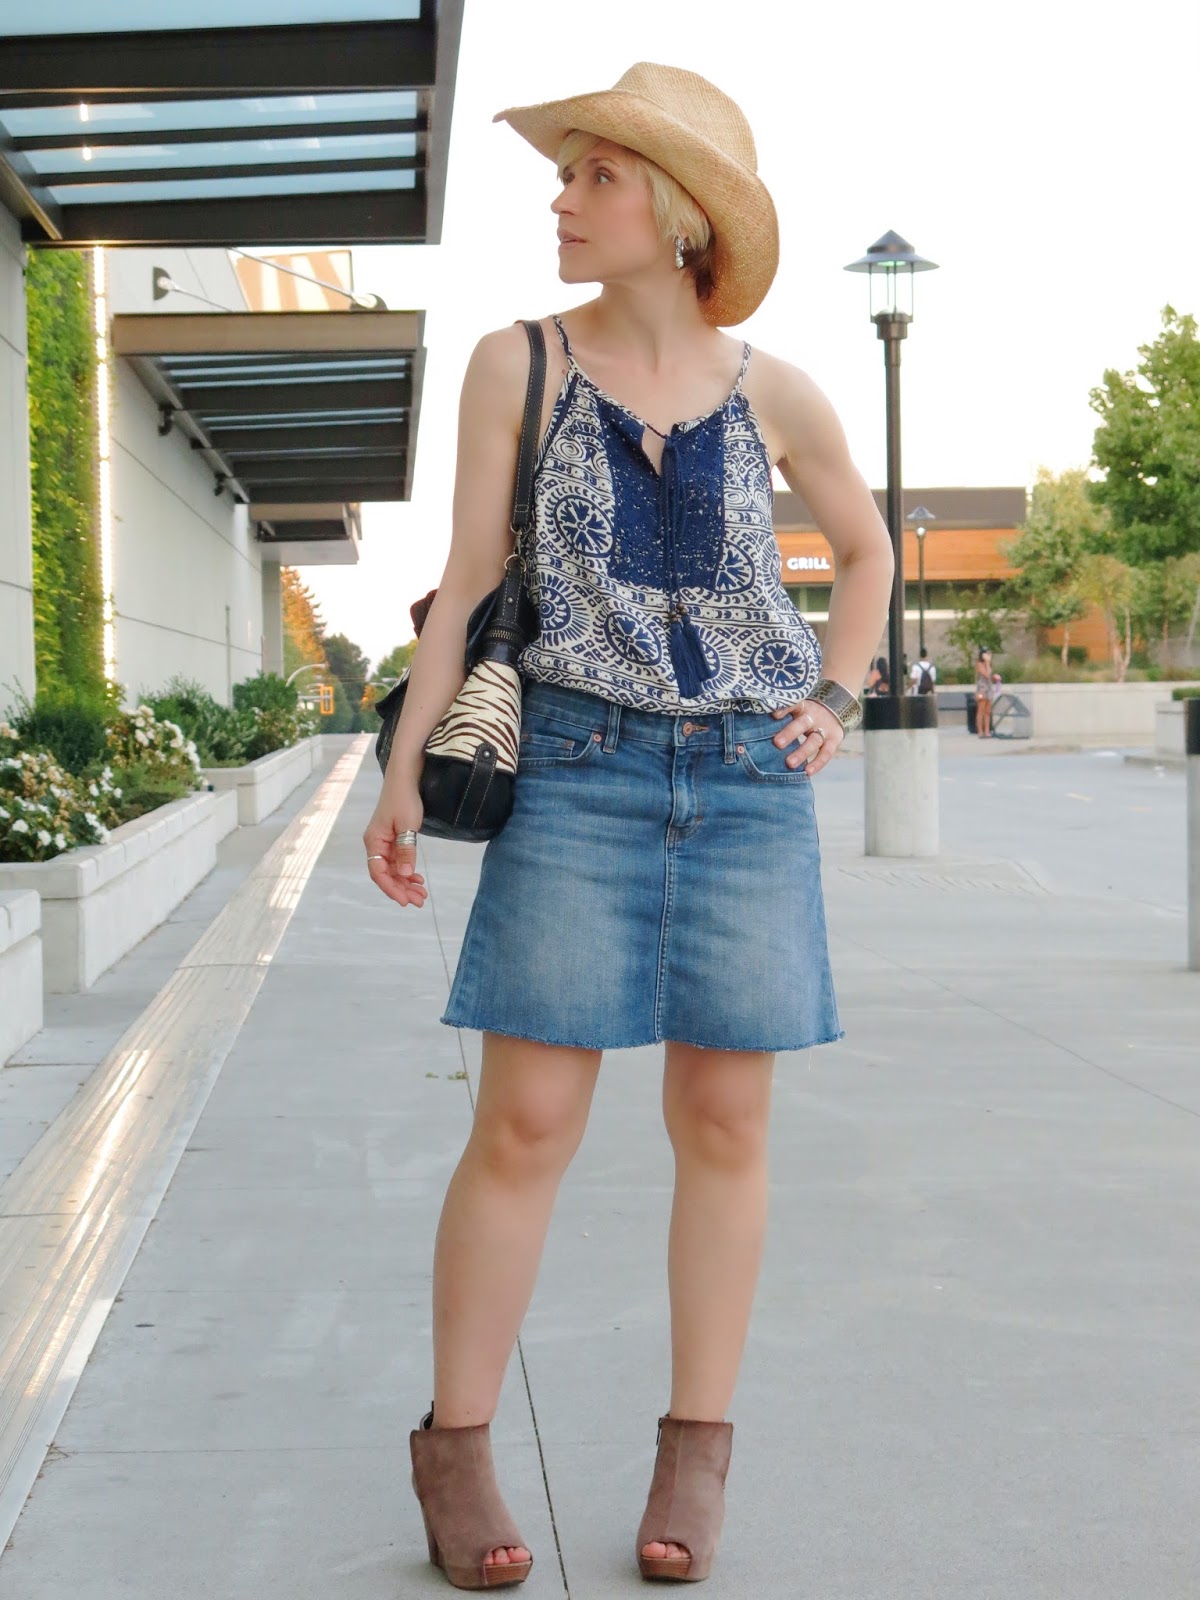 Giddy-up: a cut-off denim skirt with a peasant tank, open-toe ...